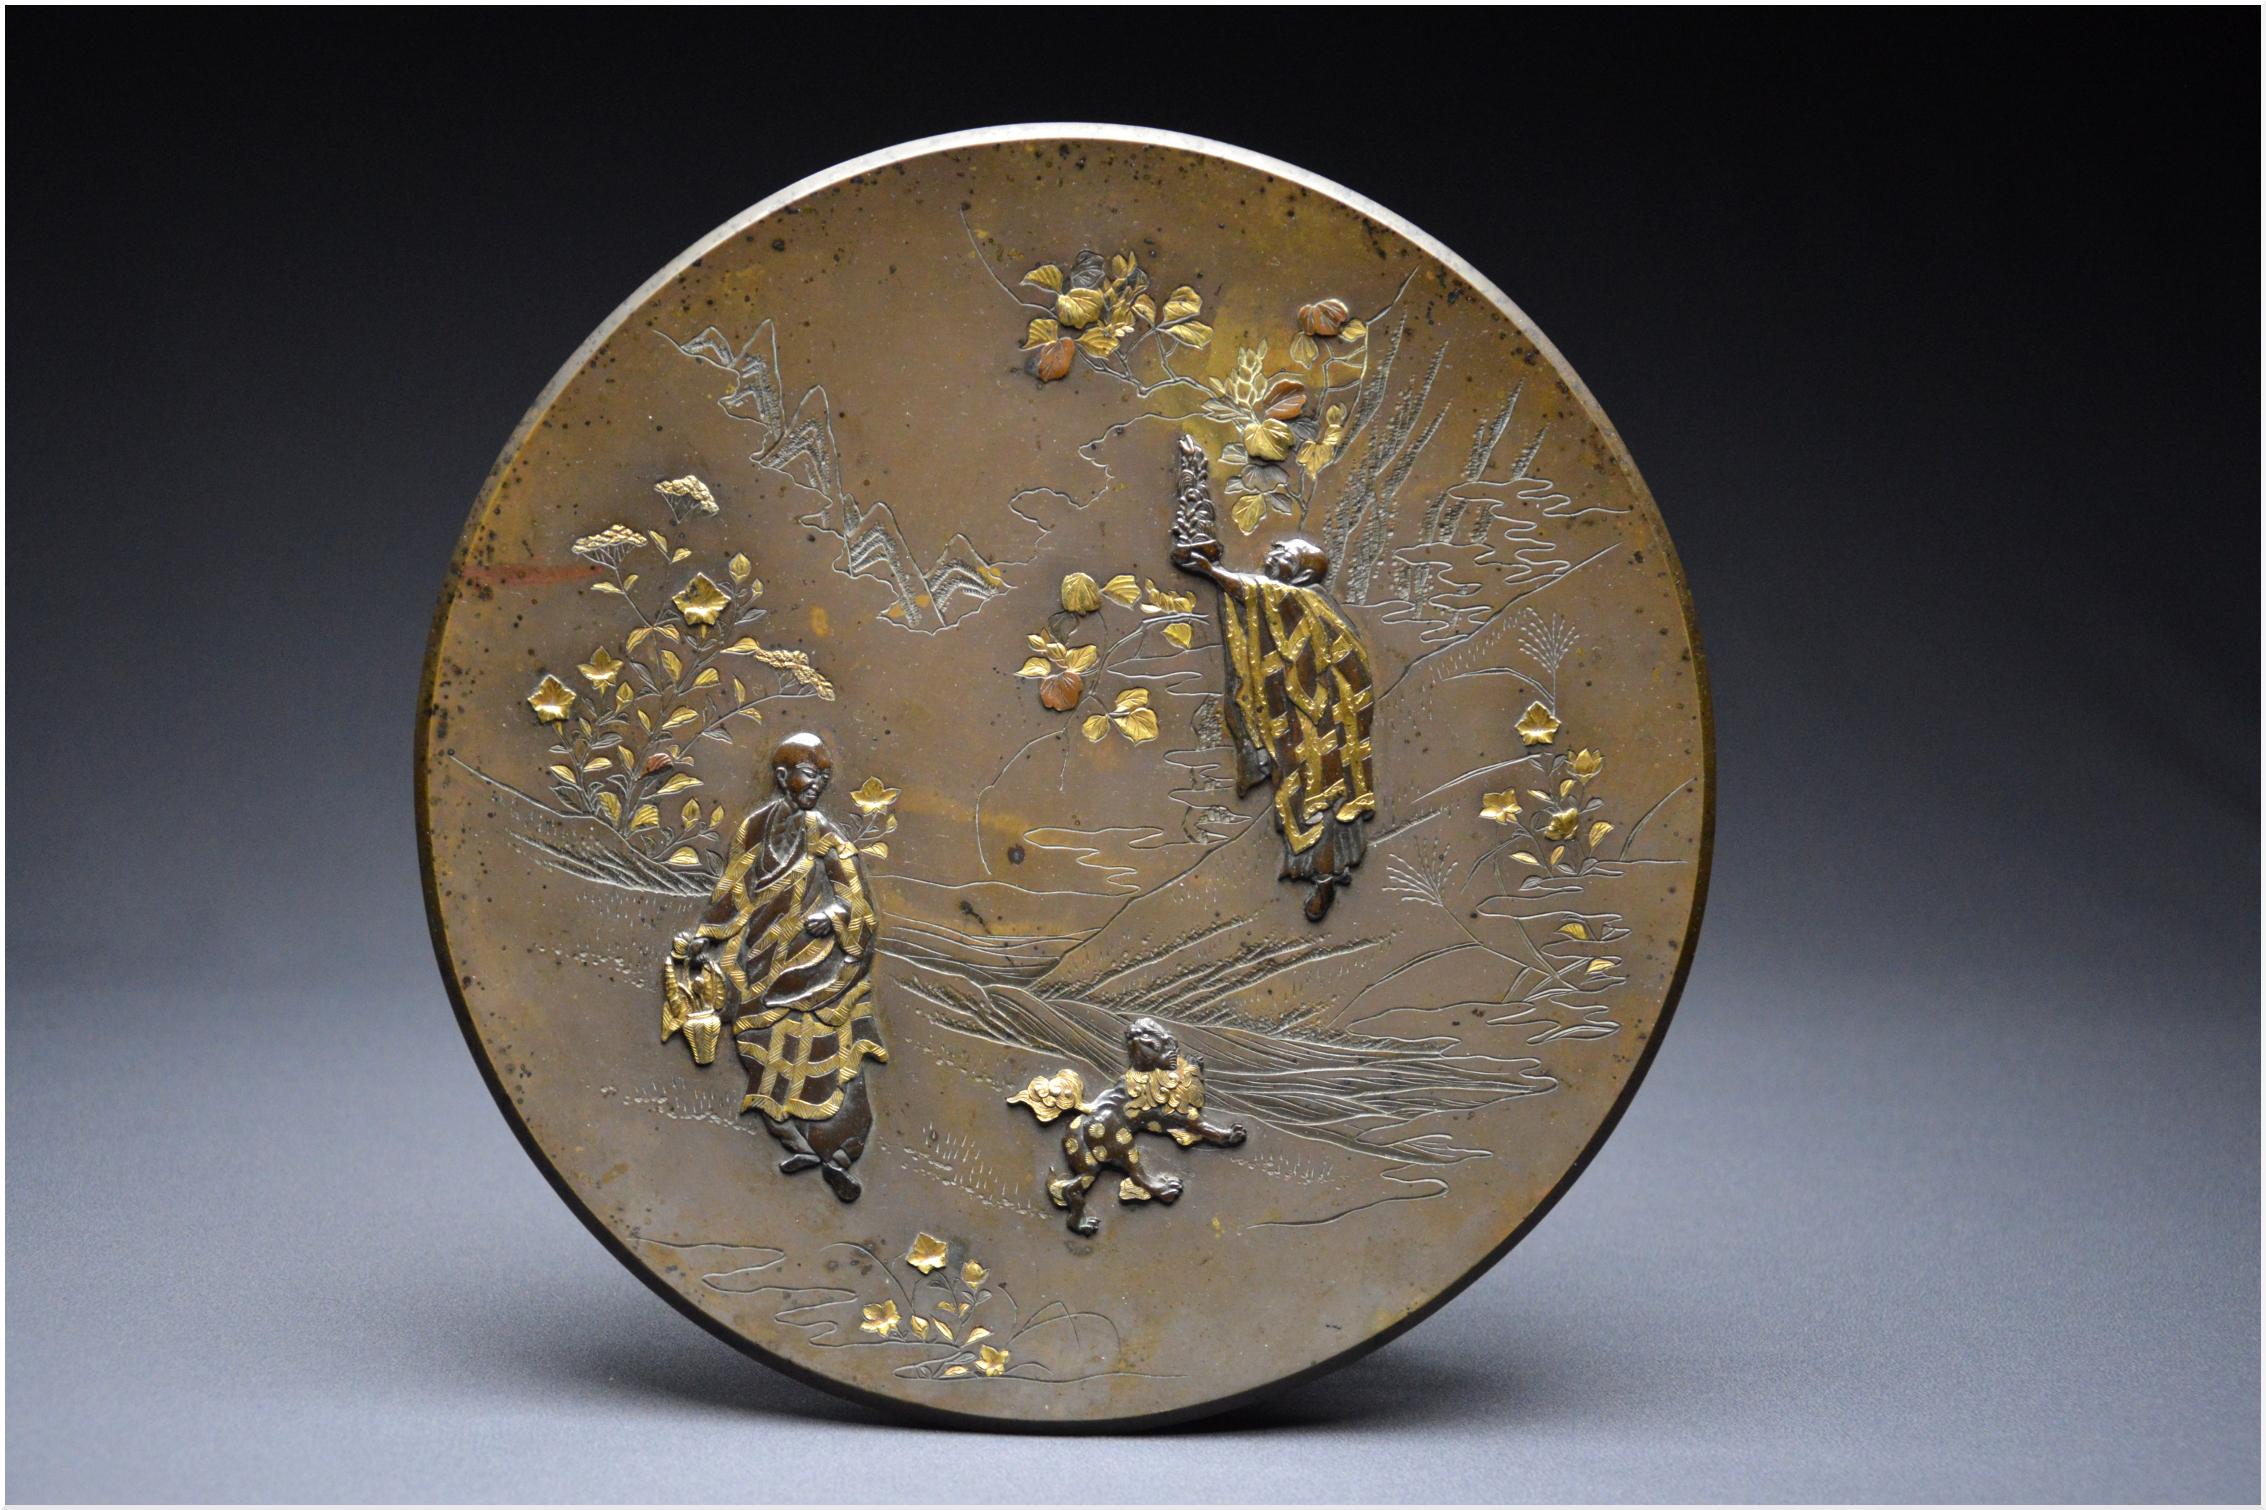 Japan
Me iji period (1868 – 1912)
Copper alloy with brown patina and gilt highlights
26.8cm
Metal weathering
Former french private collection

Japanese circular bronze dish with an engraved decoration of a bucolic landscape as well as a sishi